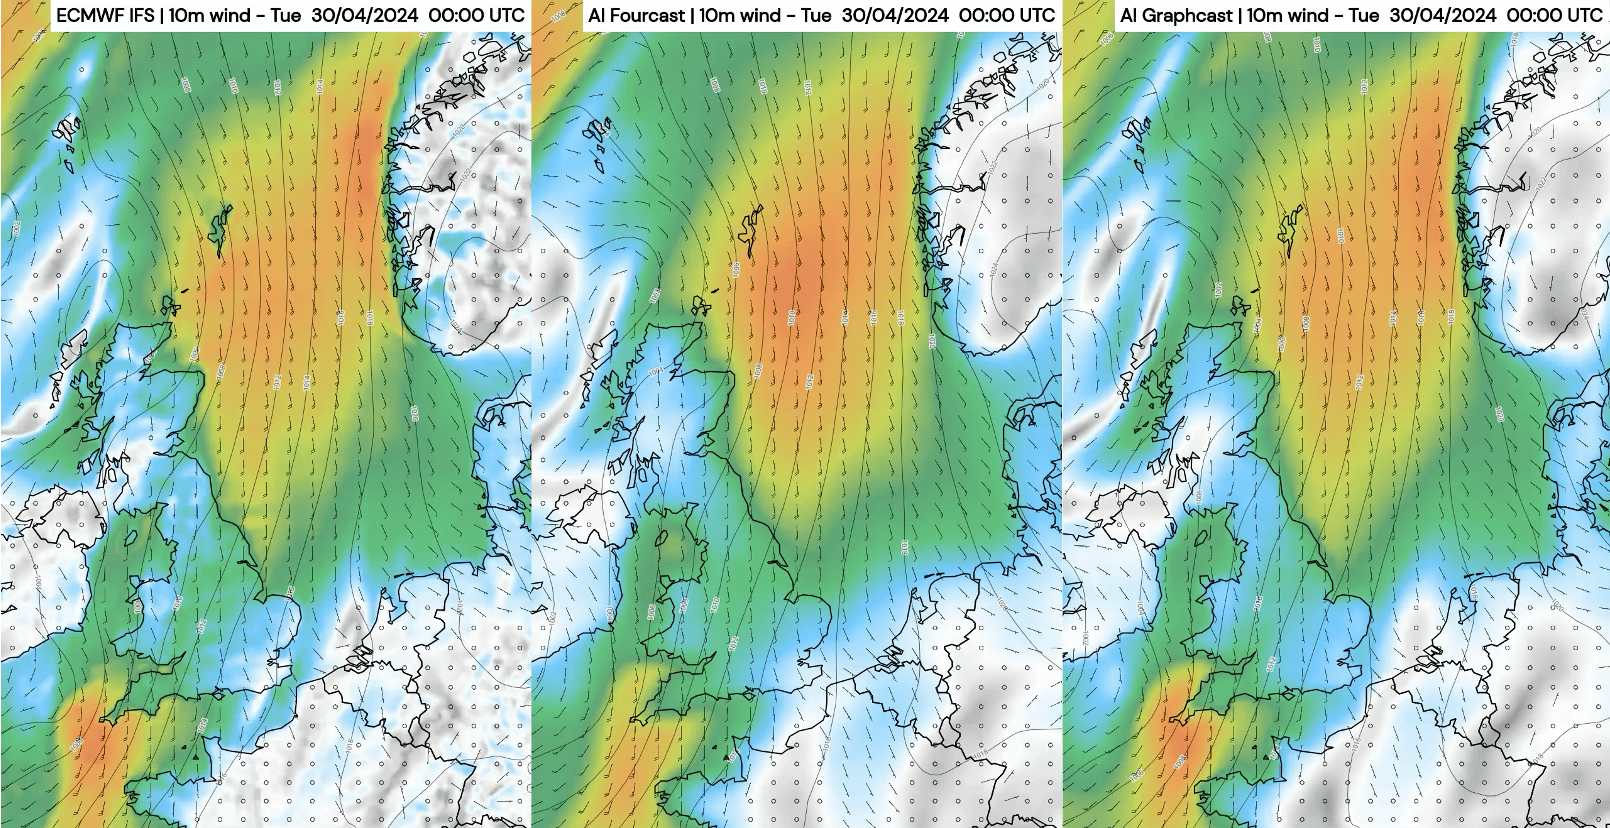 MetX map comparing 10 m wind speeds in Northern Europe from the ECMWF IFS model and AI-based models.